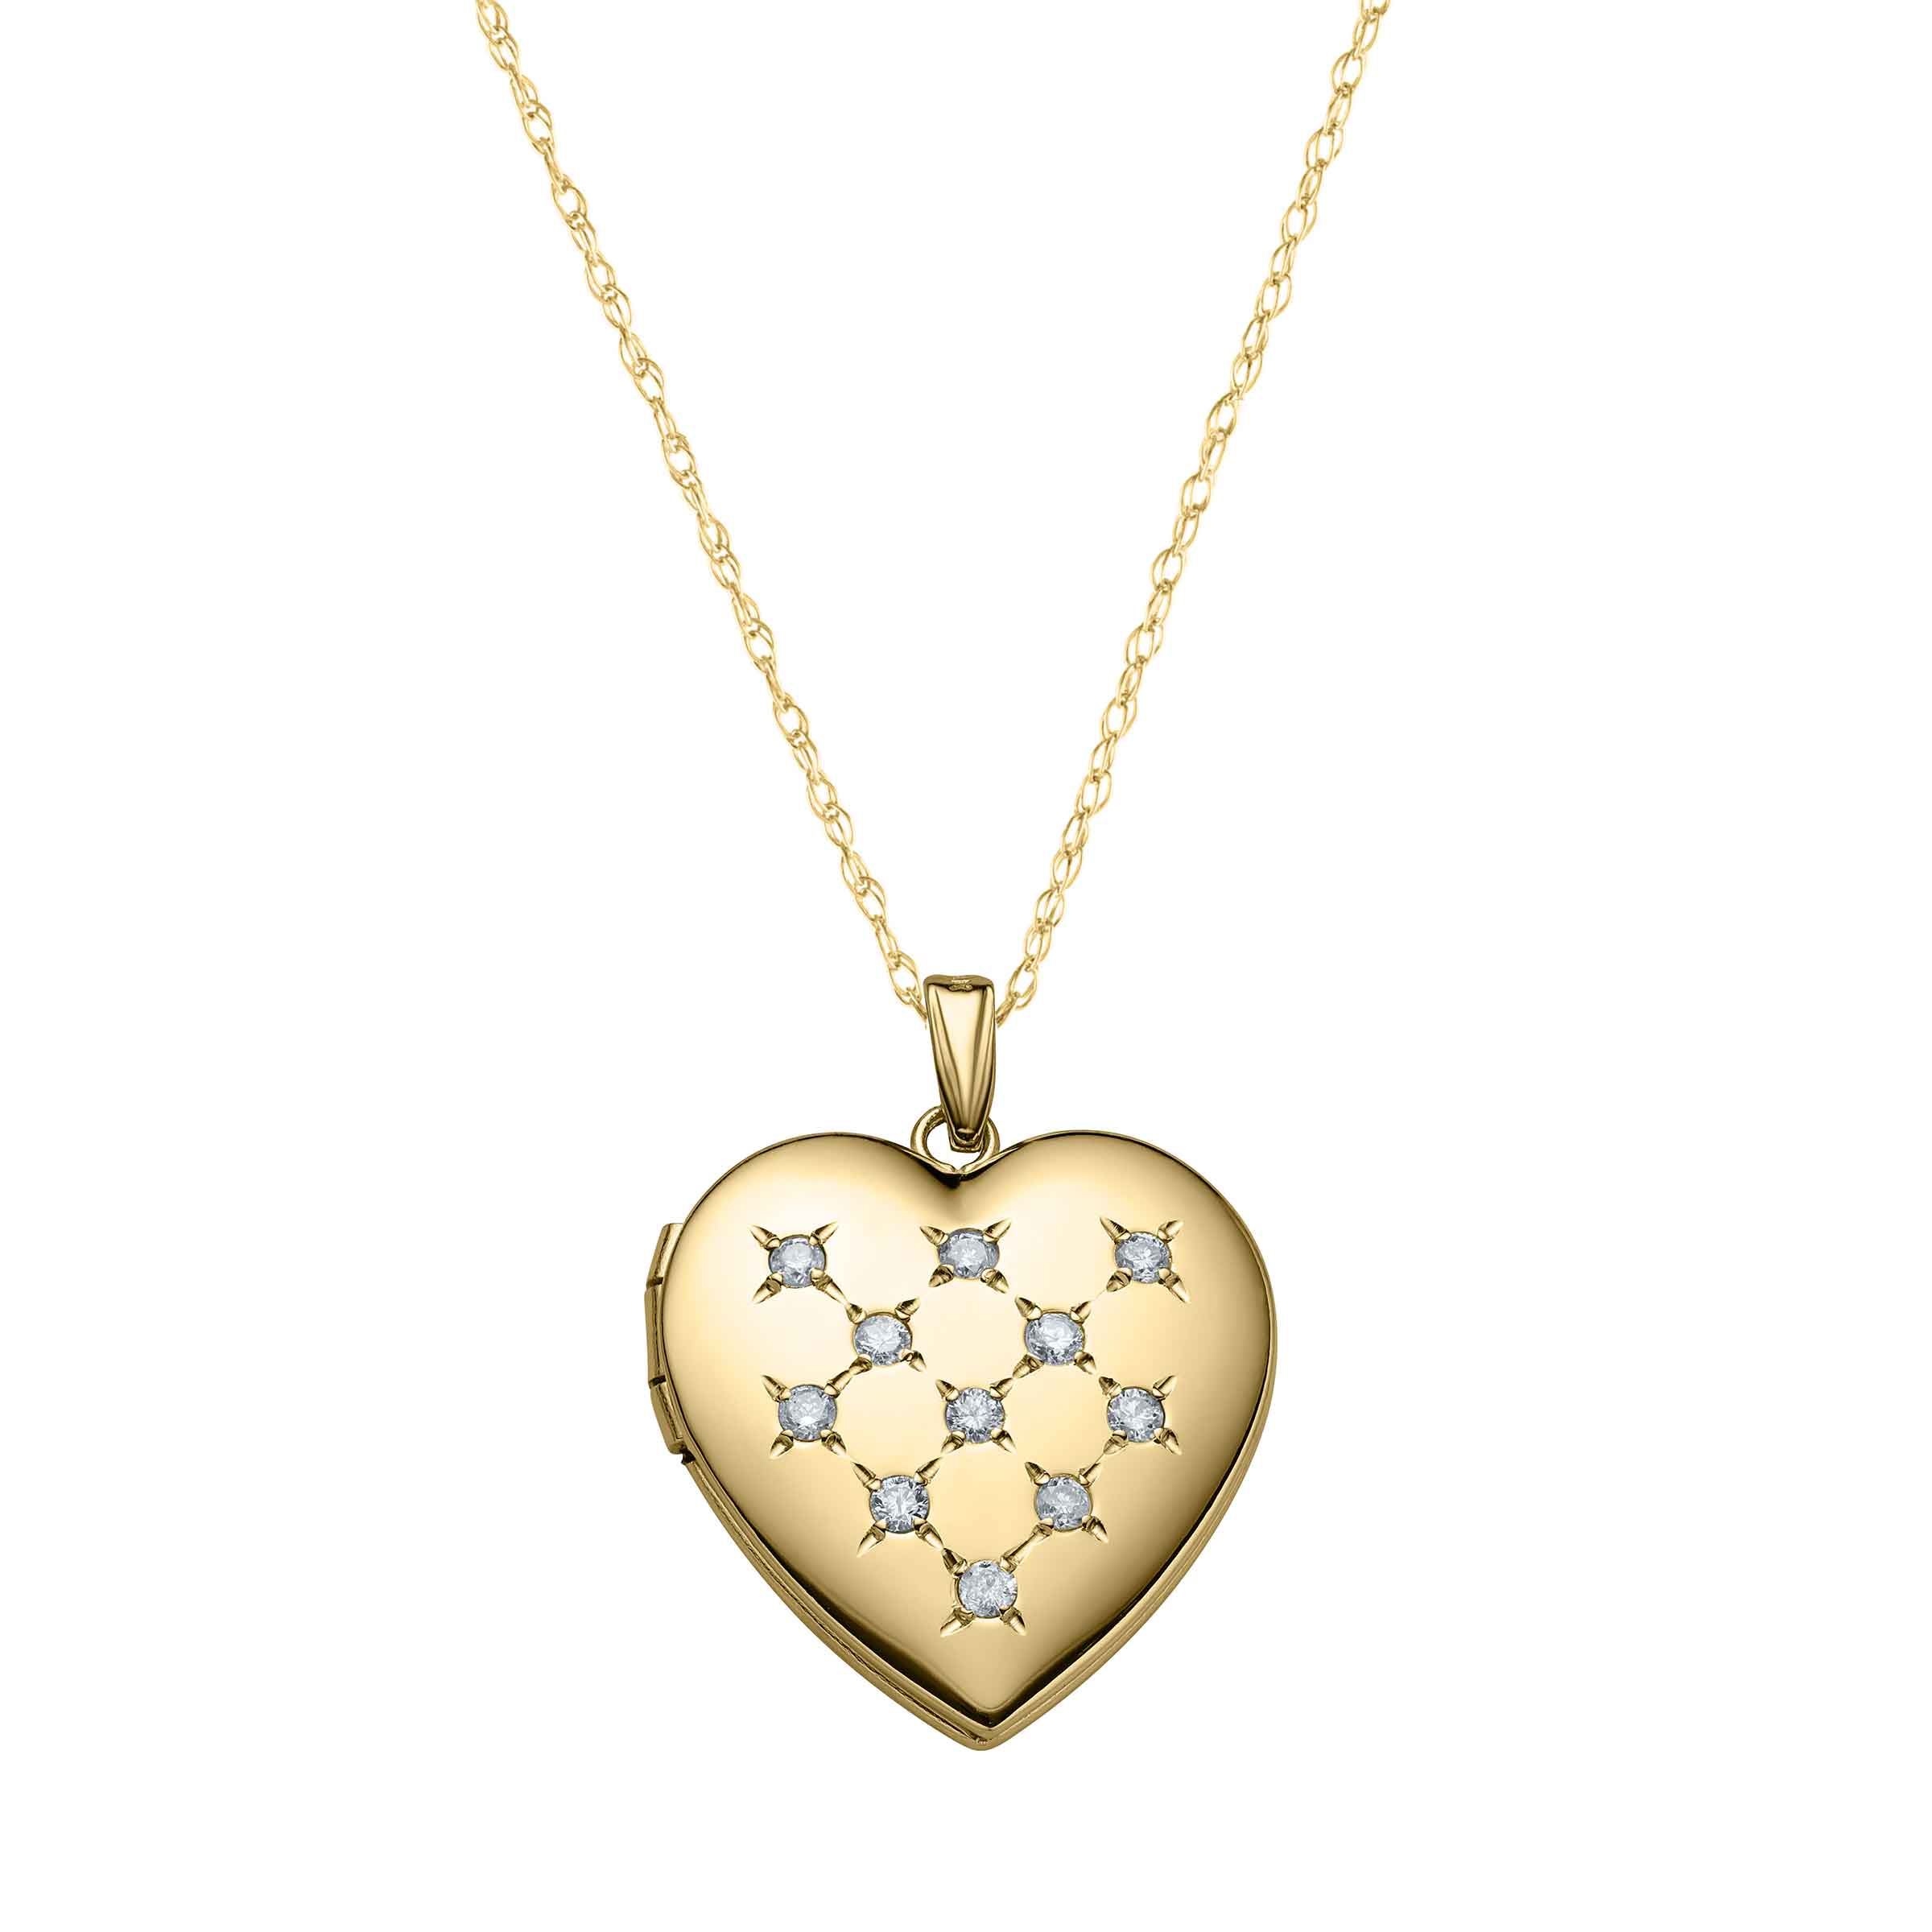 Lego Heart Detachable Necklaces – Bling Little Thing